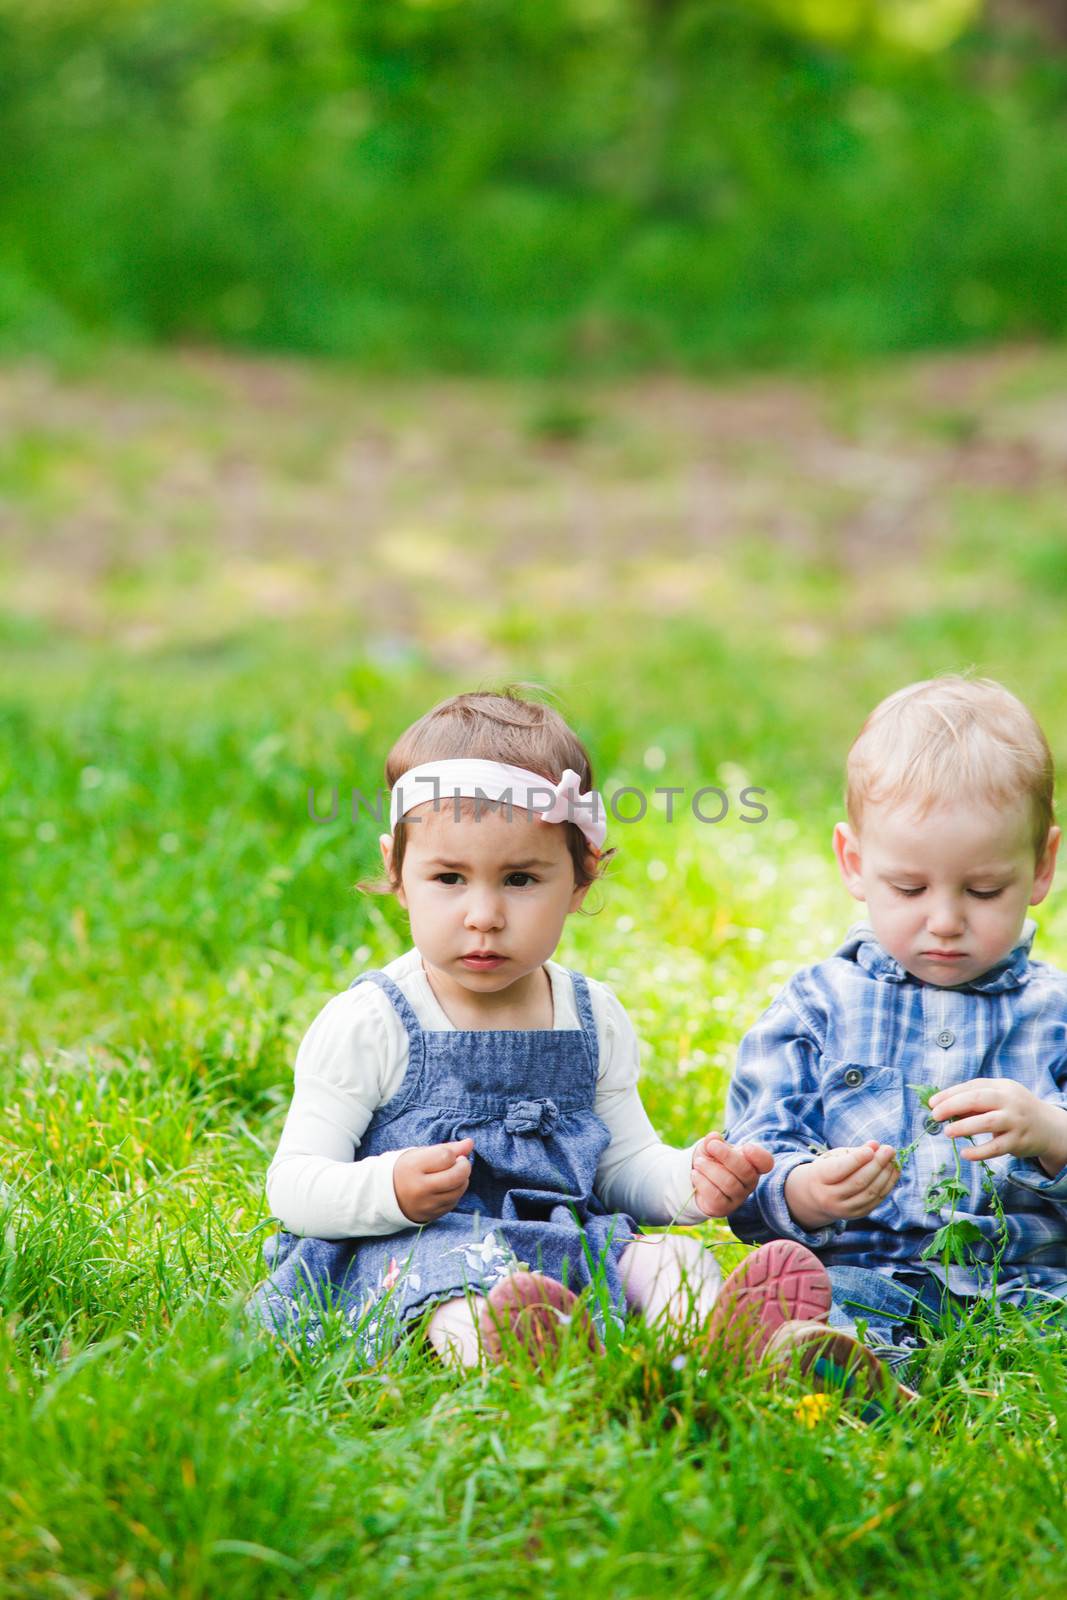 Little kids play outdoors on the grass